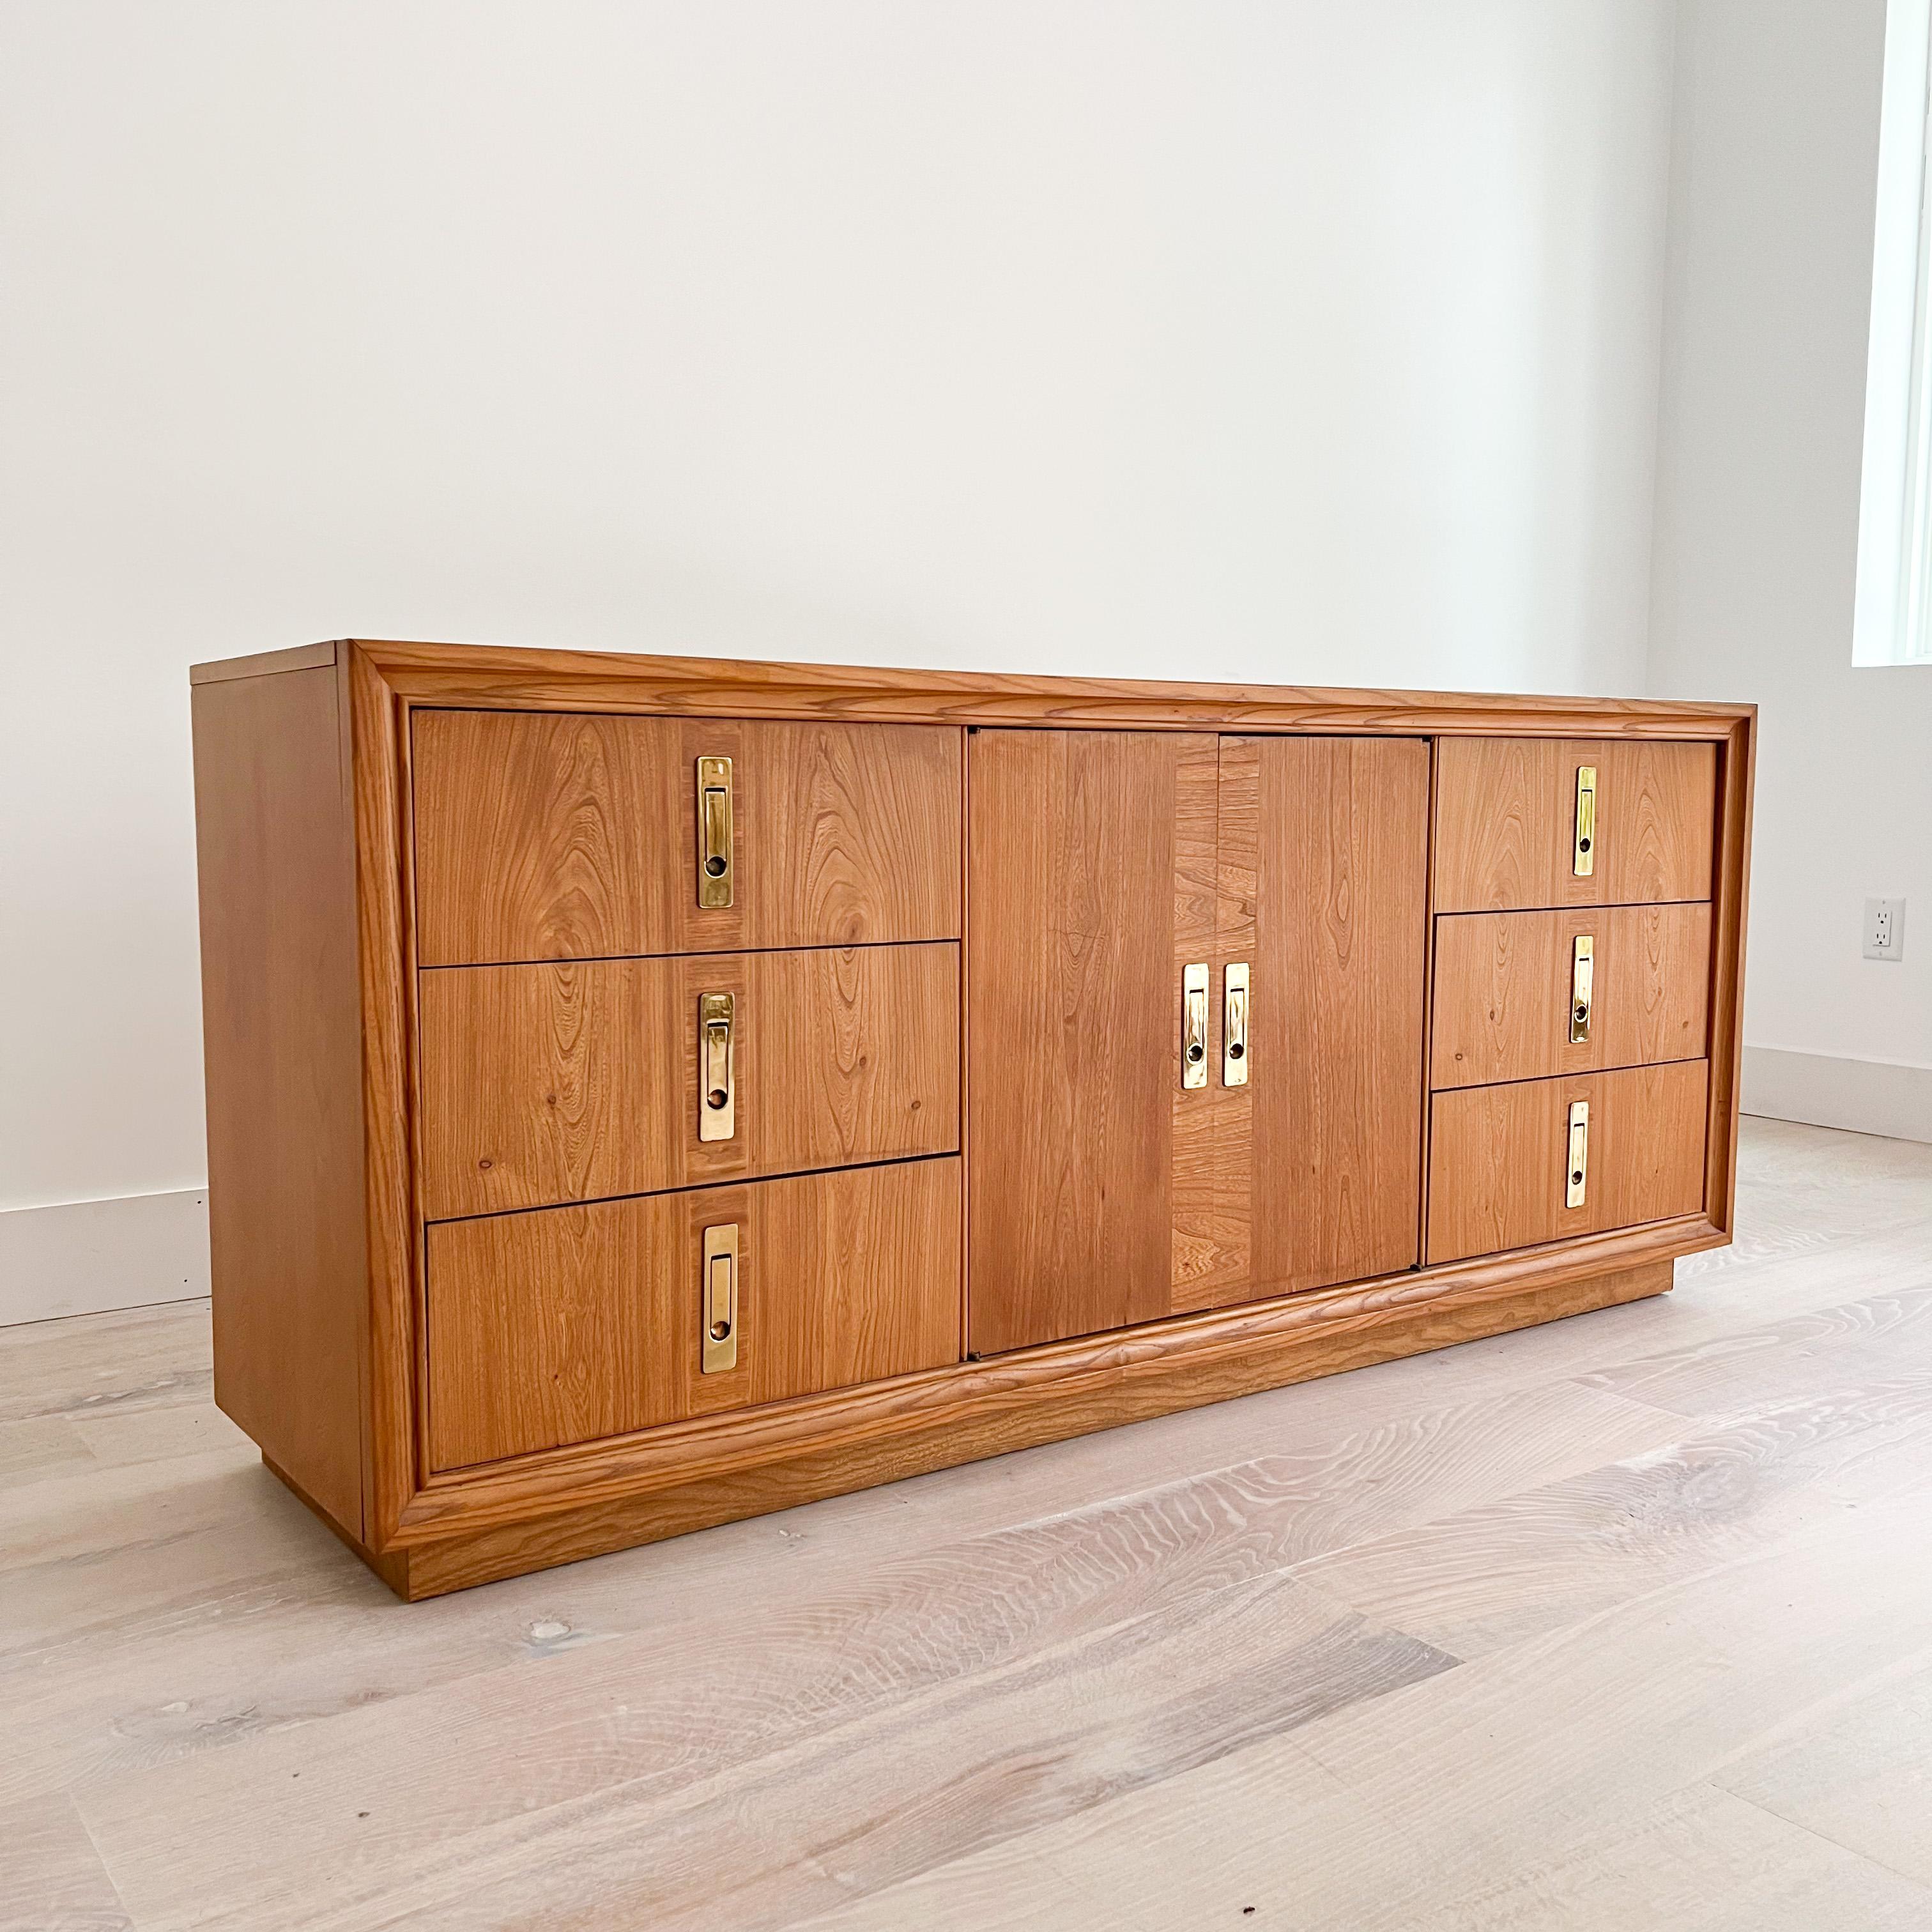 Rare mid century modern low dresser with brass drawer pulls by American Drew. 
American Drew's (a North Carolina company) portfolio of collections covers a broad variety of styles from modern to classical. Influenced by furniture craftsmen, and the